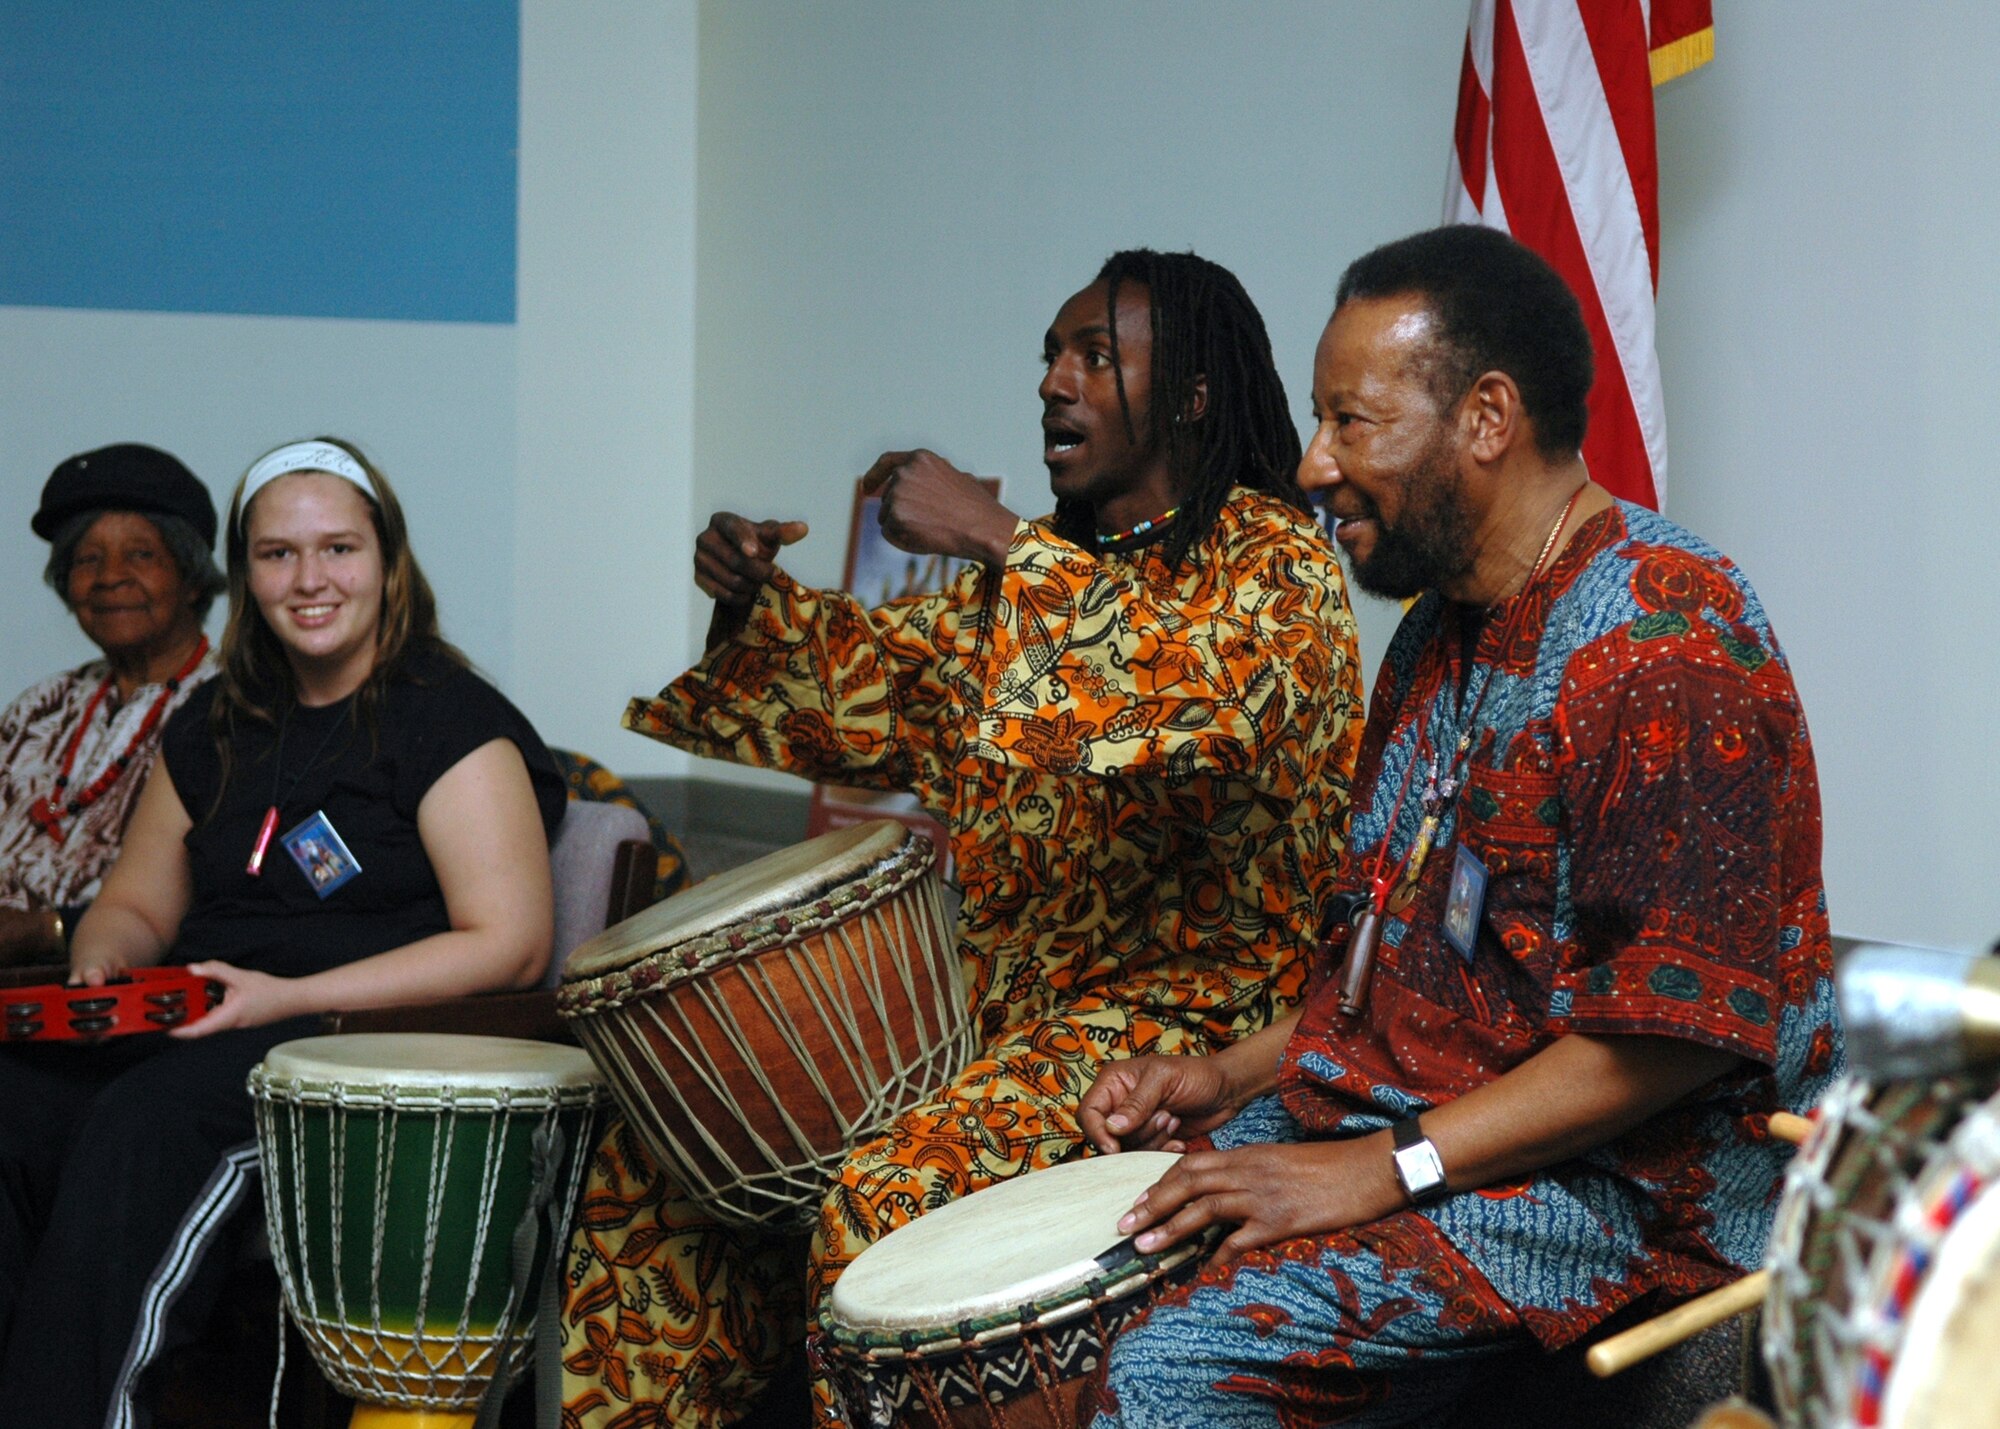 The New World Drummers of Las Cruces, N.M., came to Holloman Feb. 22 and performed in celebration of African American Black History Month at Bong Theater. (U.S. Air Force photo by Airman Jamal Sutter)